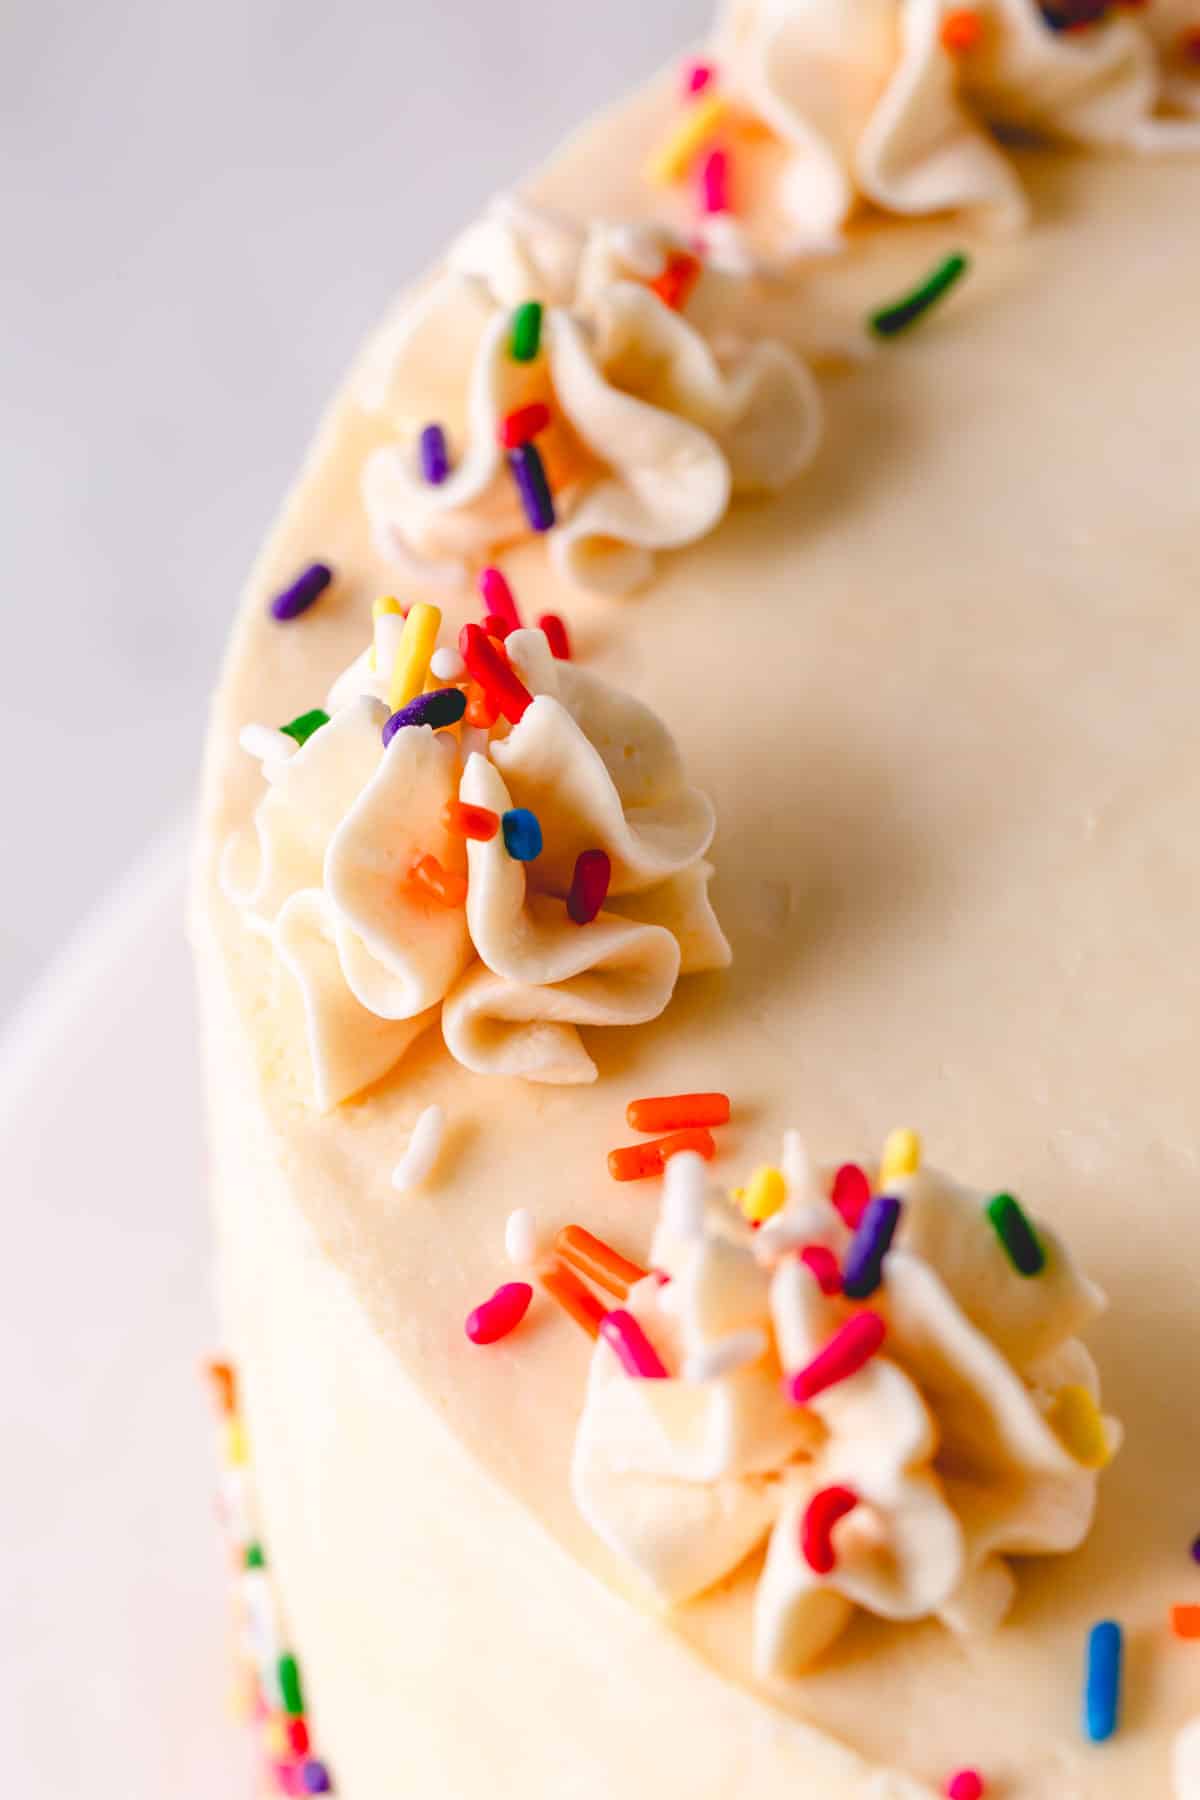 A cake decorated with vanilla Russian buttercream and sprinkles.